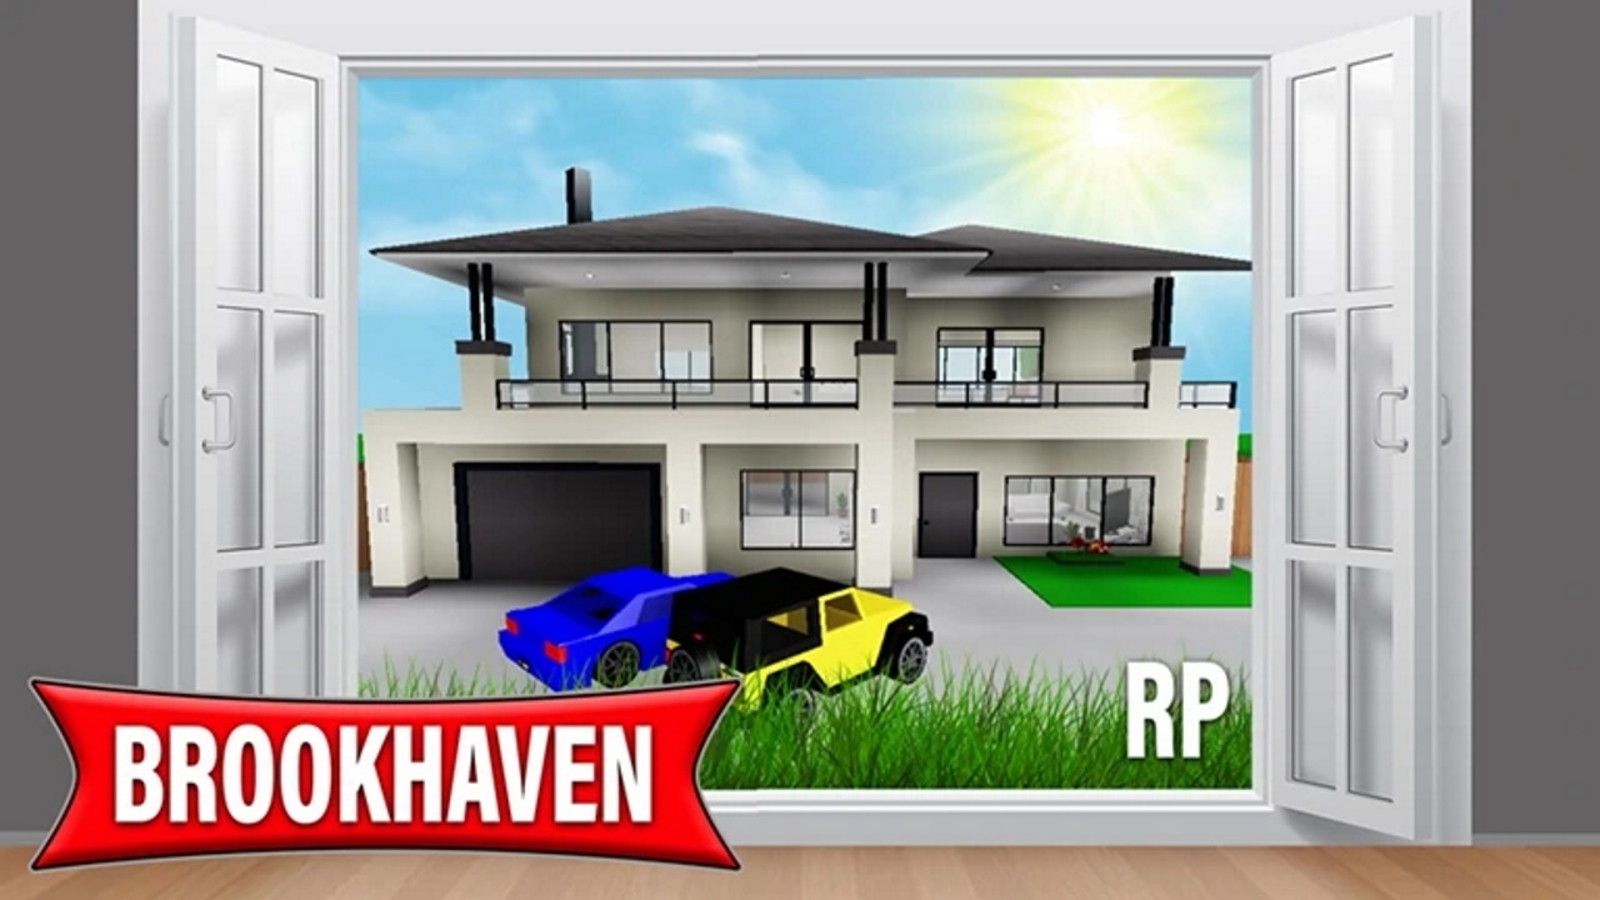 id 🏡Brookhaven RP🏡